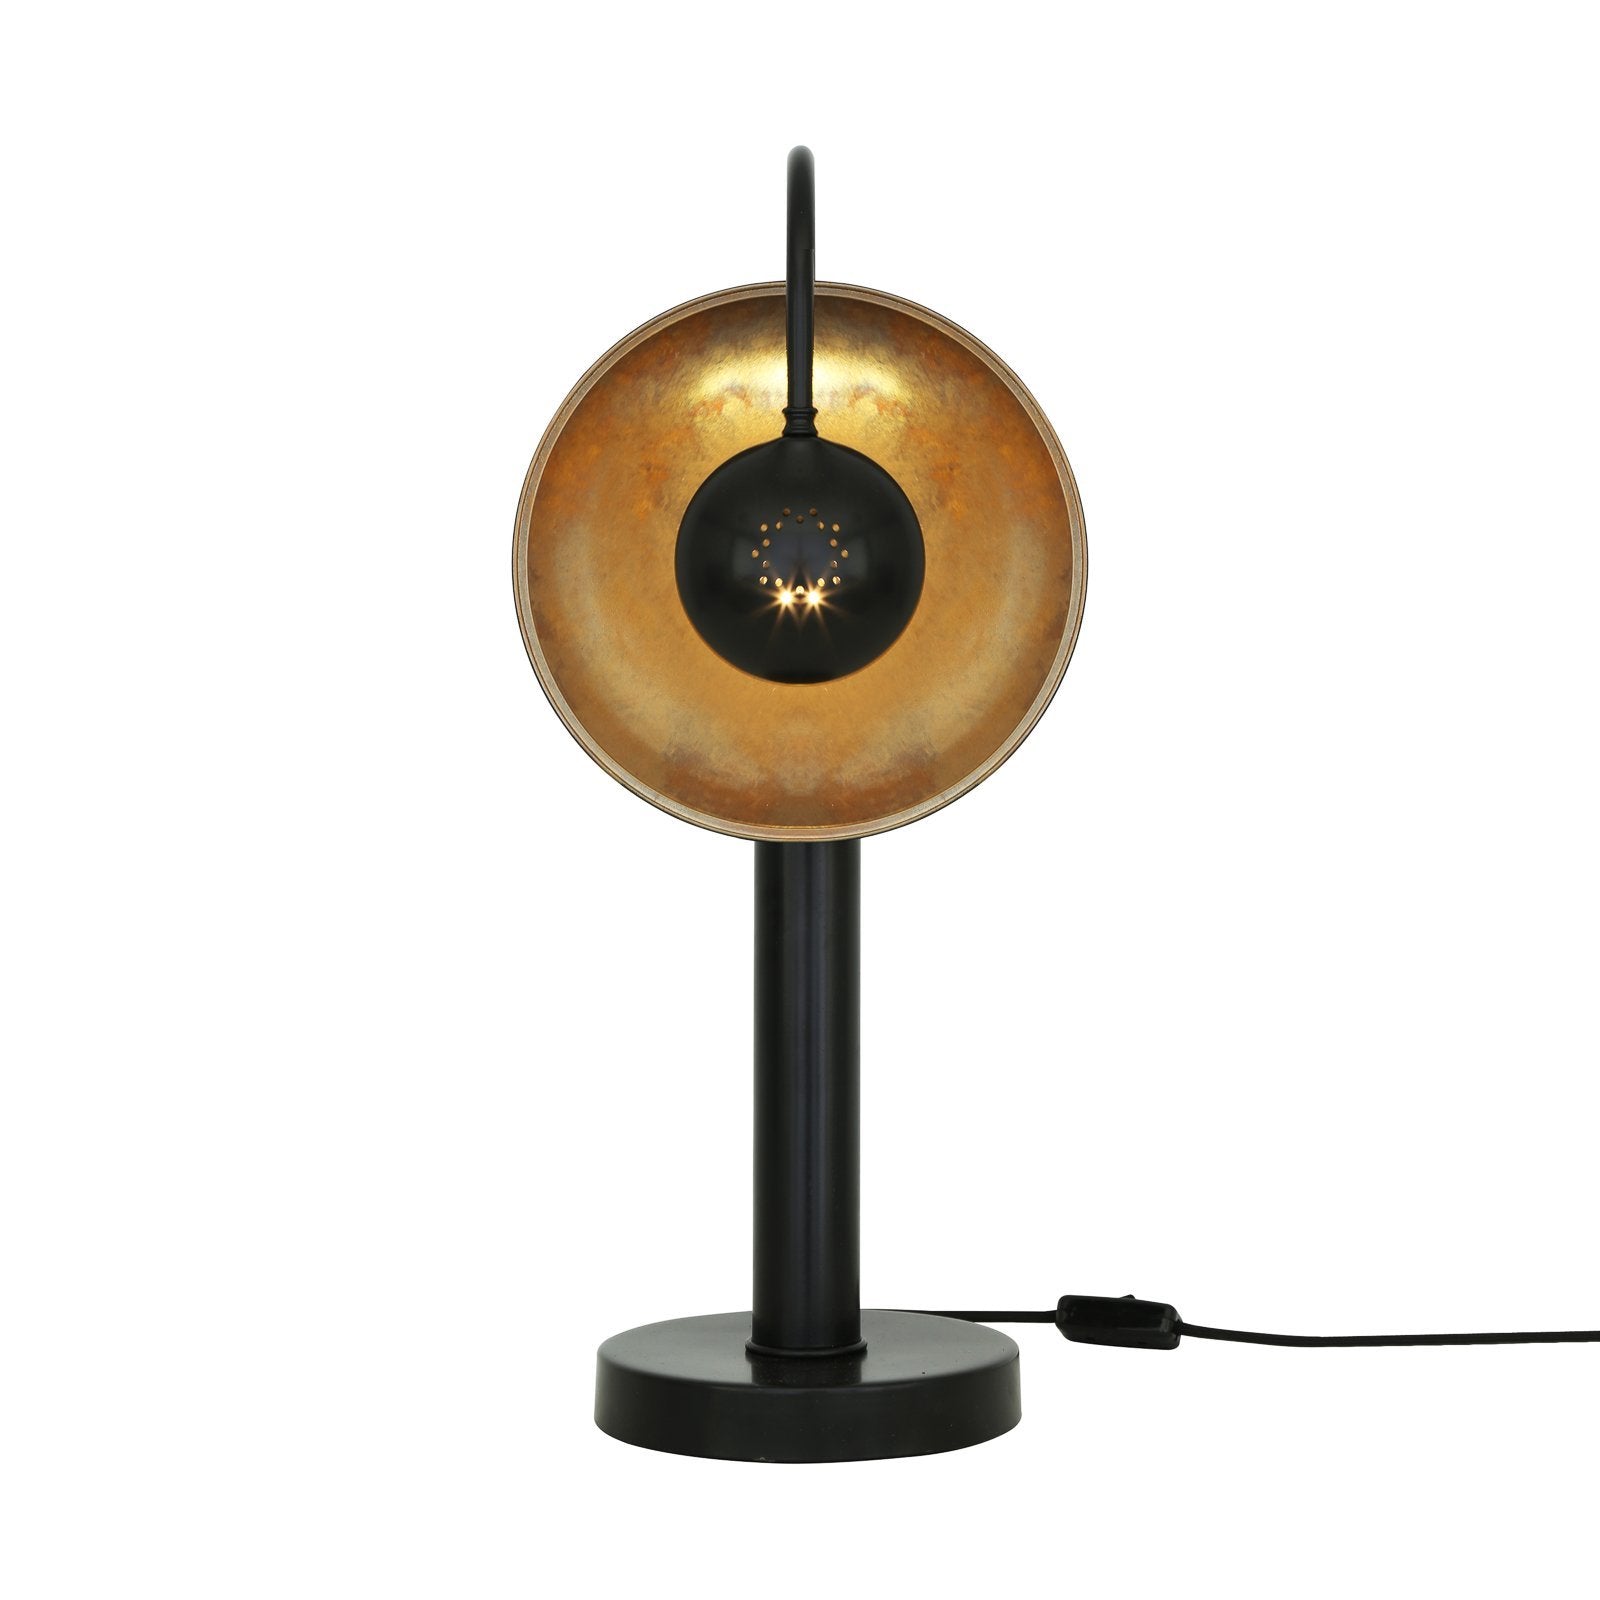 Orebro Table Lamp - Table Lamps from RETROLIGHT. Made by Mullan Lighting.